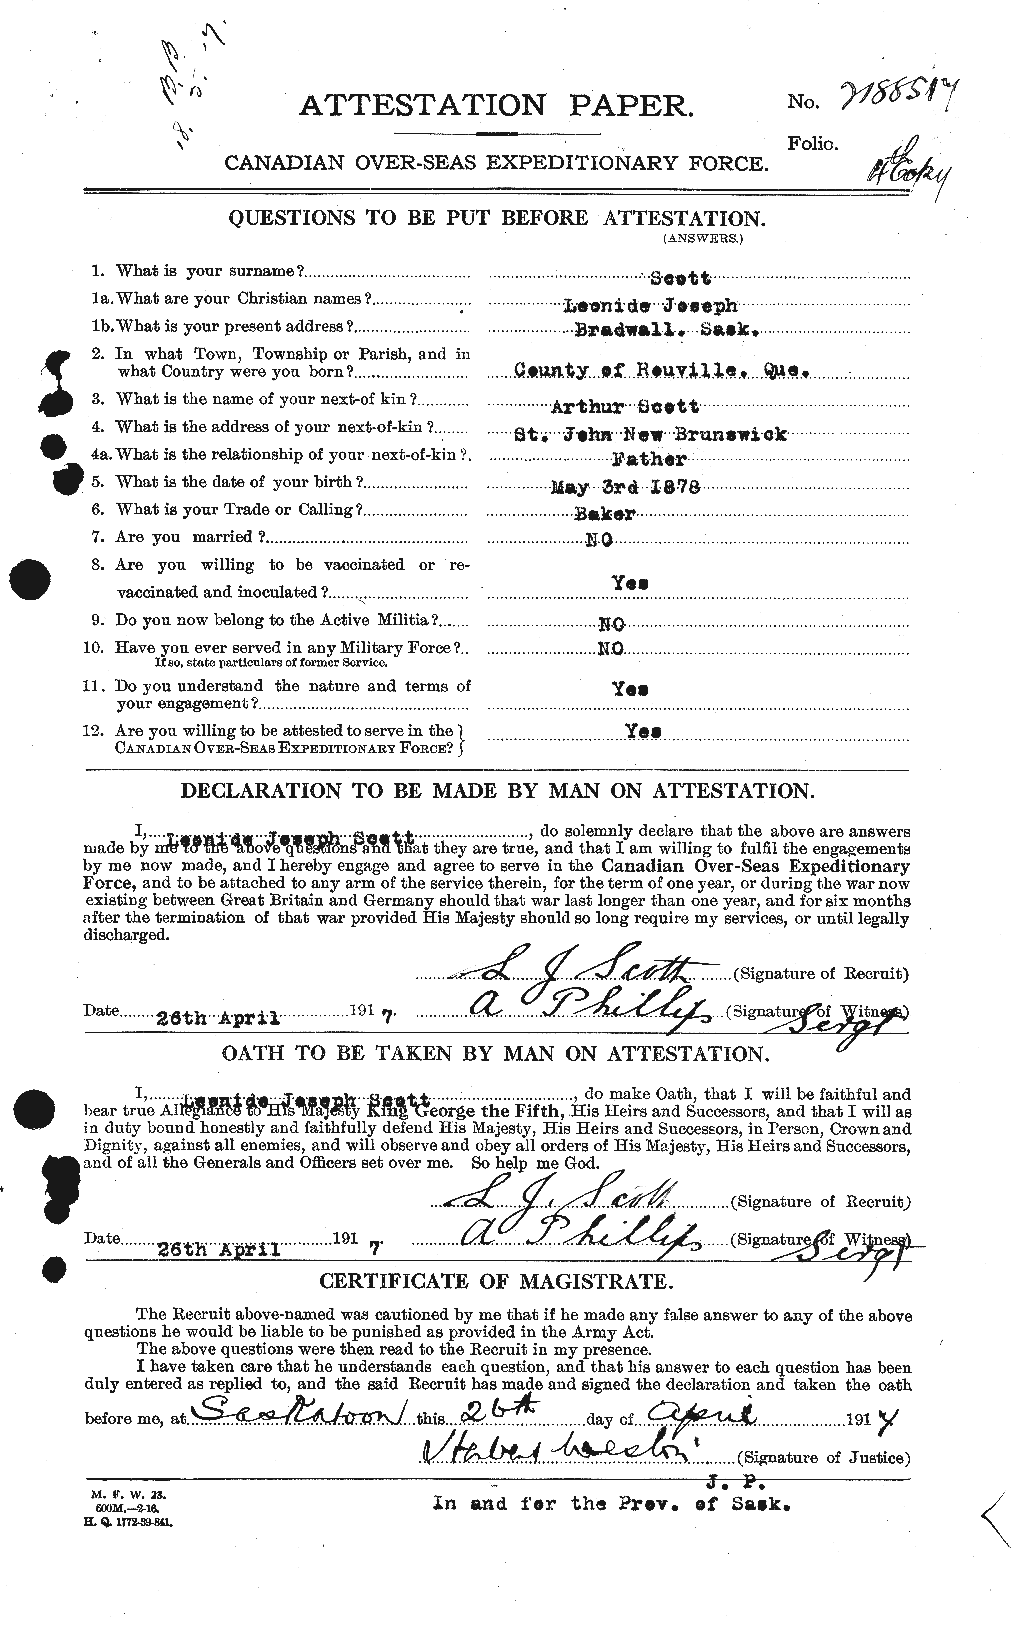 Personnel Records of the First World War - CEF 084139a